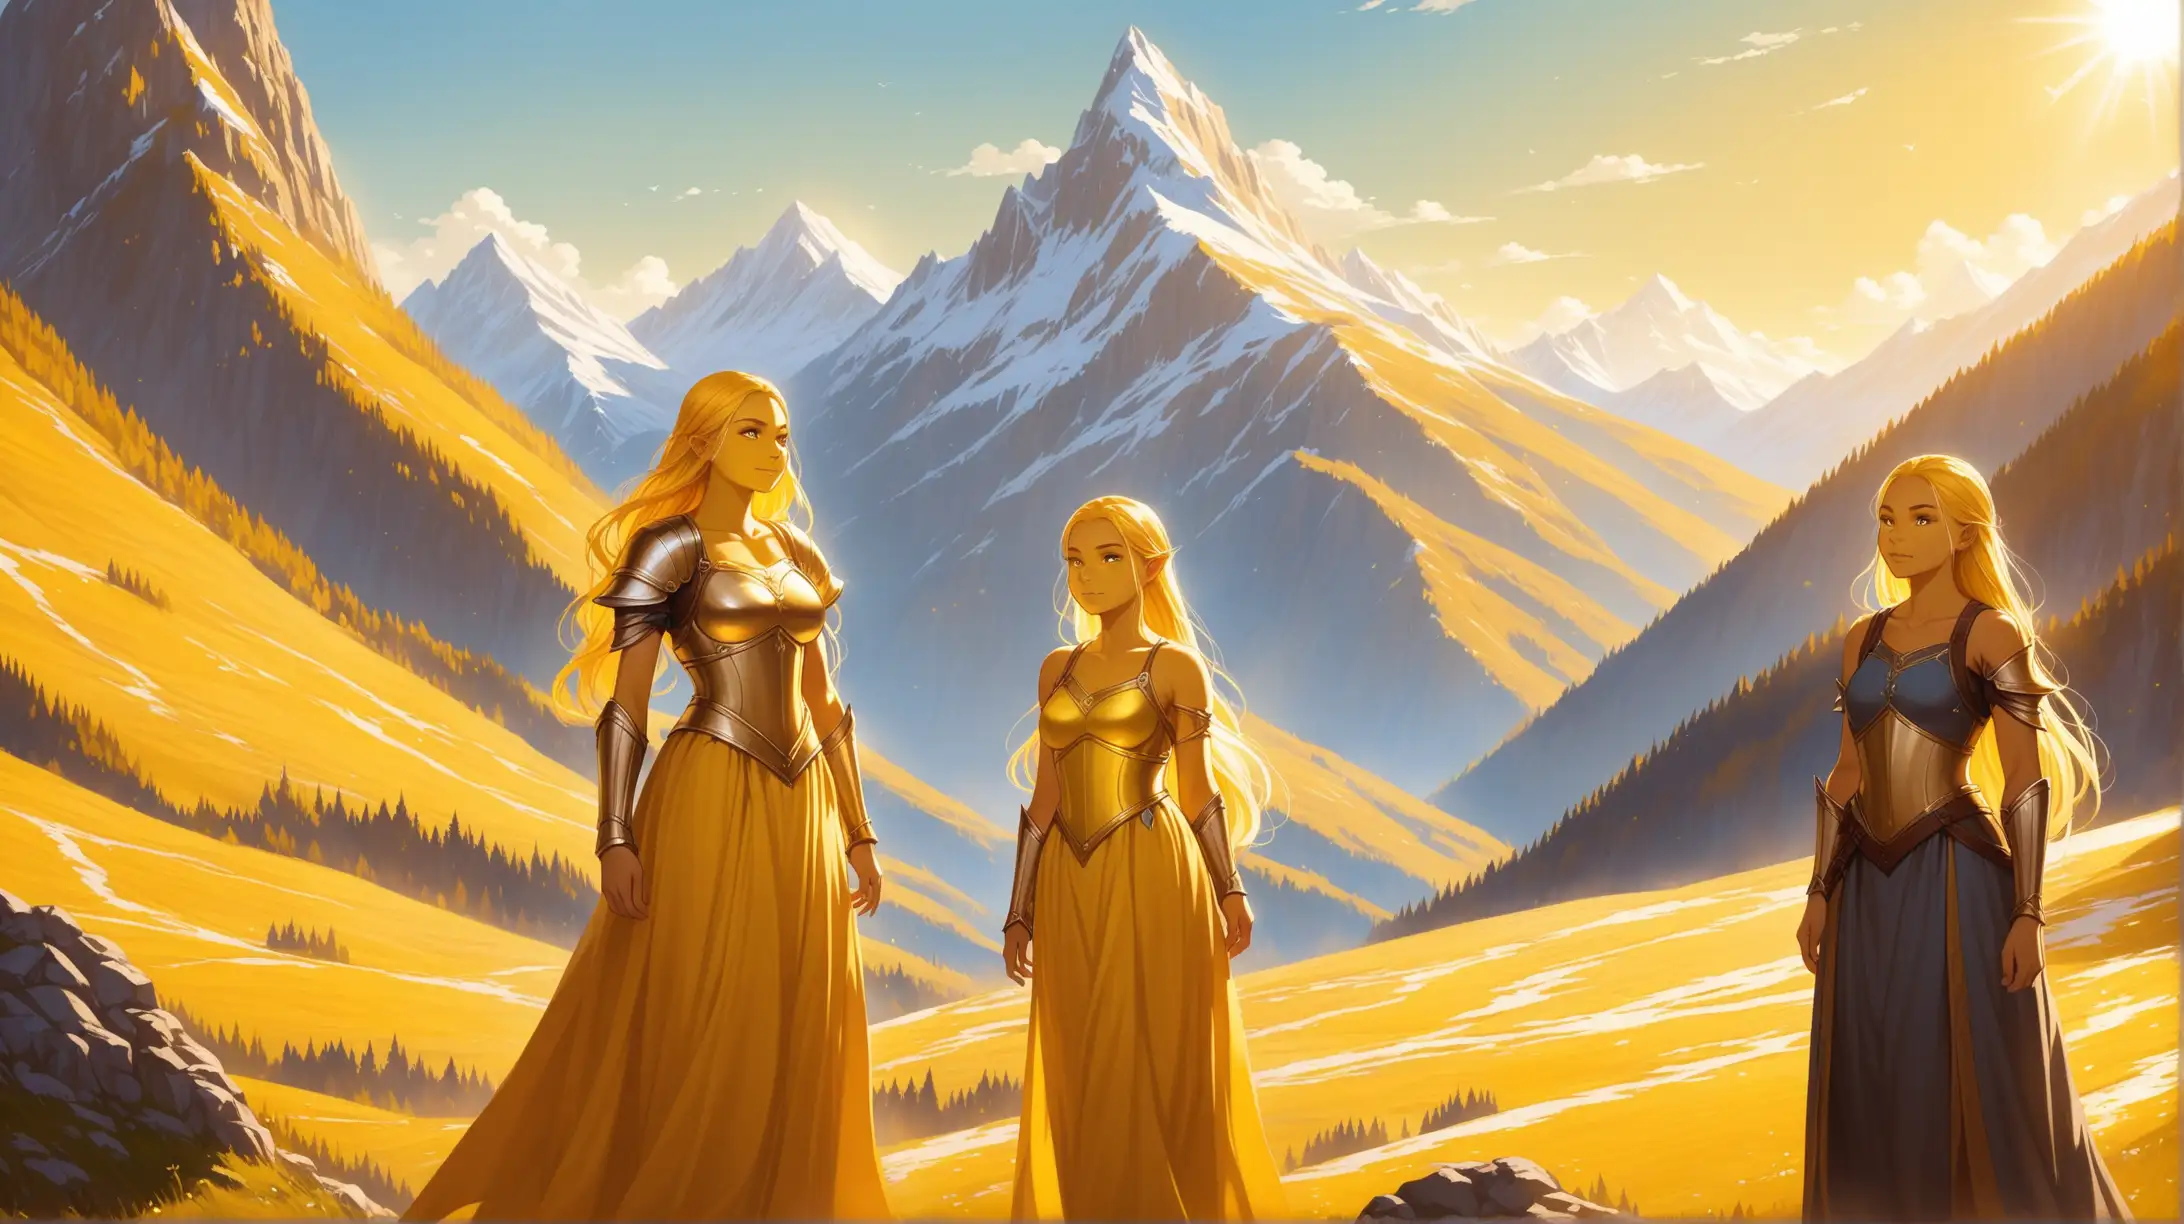 Sunlit Mountain Golden Dwarf and CleanShaven Women in Medieval Fantasy Setting